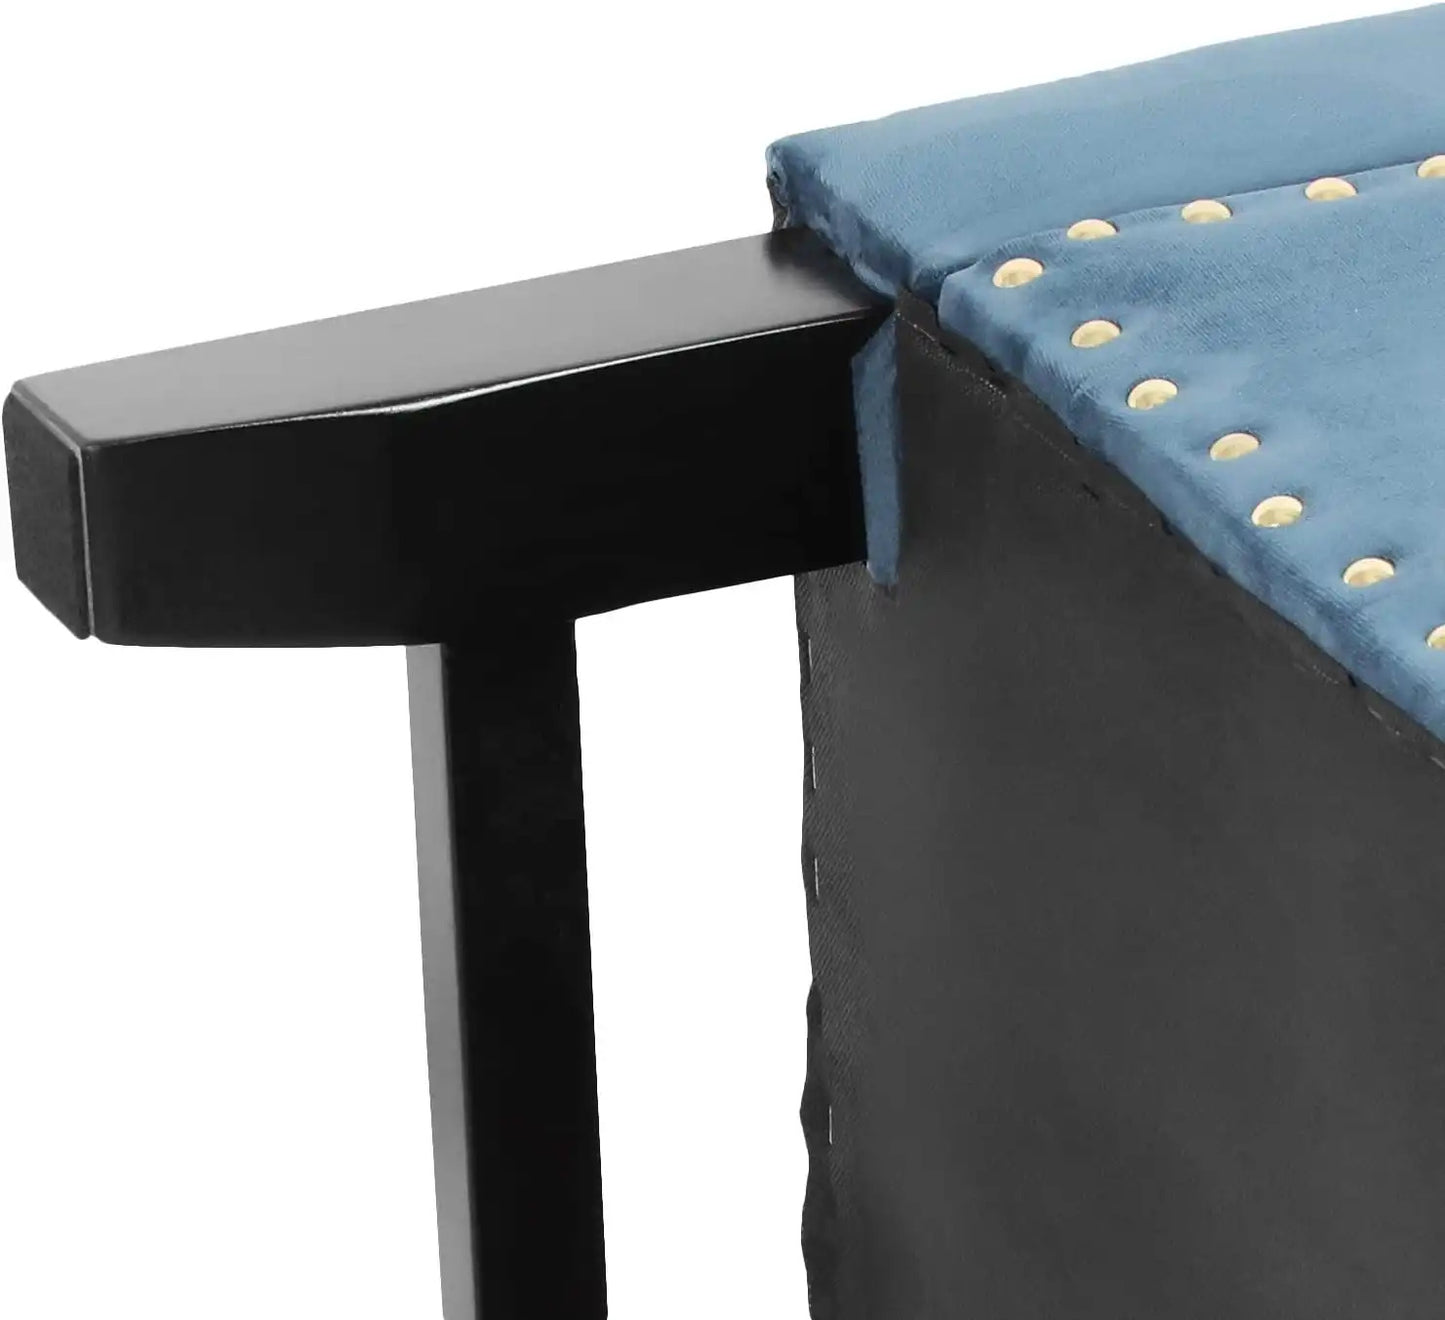 Blue Storage Ottoman Bench Microfiber Upholstered Seat Rectangle Footrest Stool